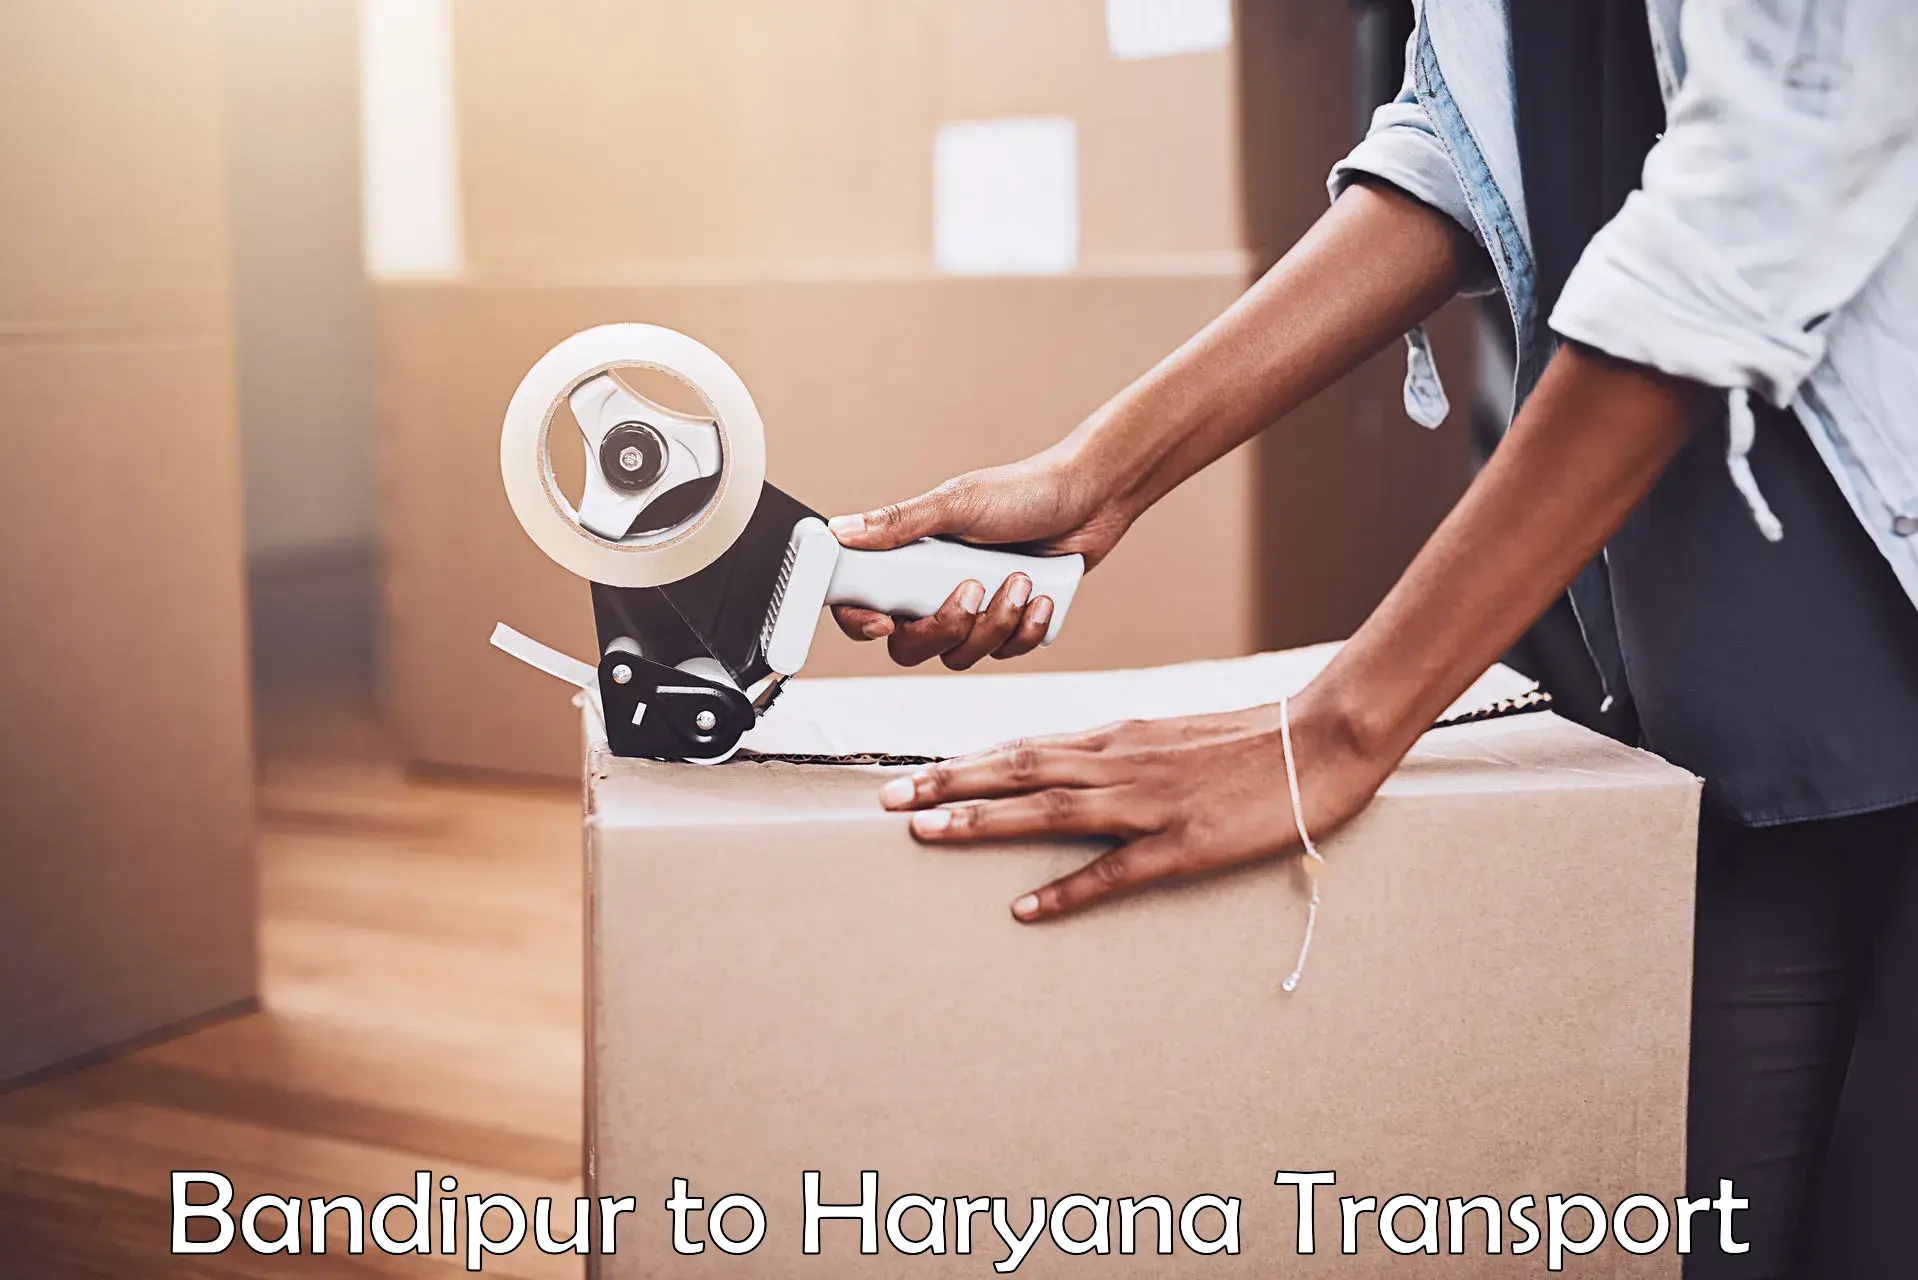 Container transportation services in Bandipur to NCR Haryana